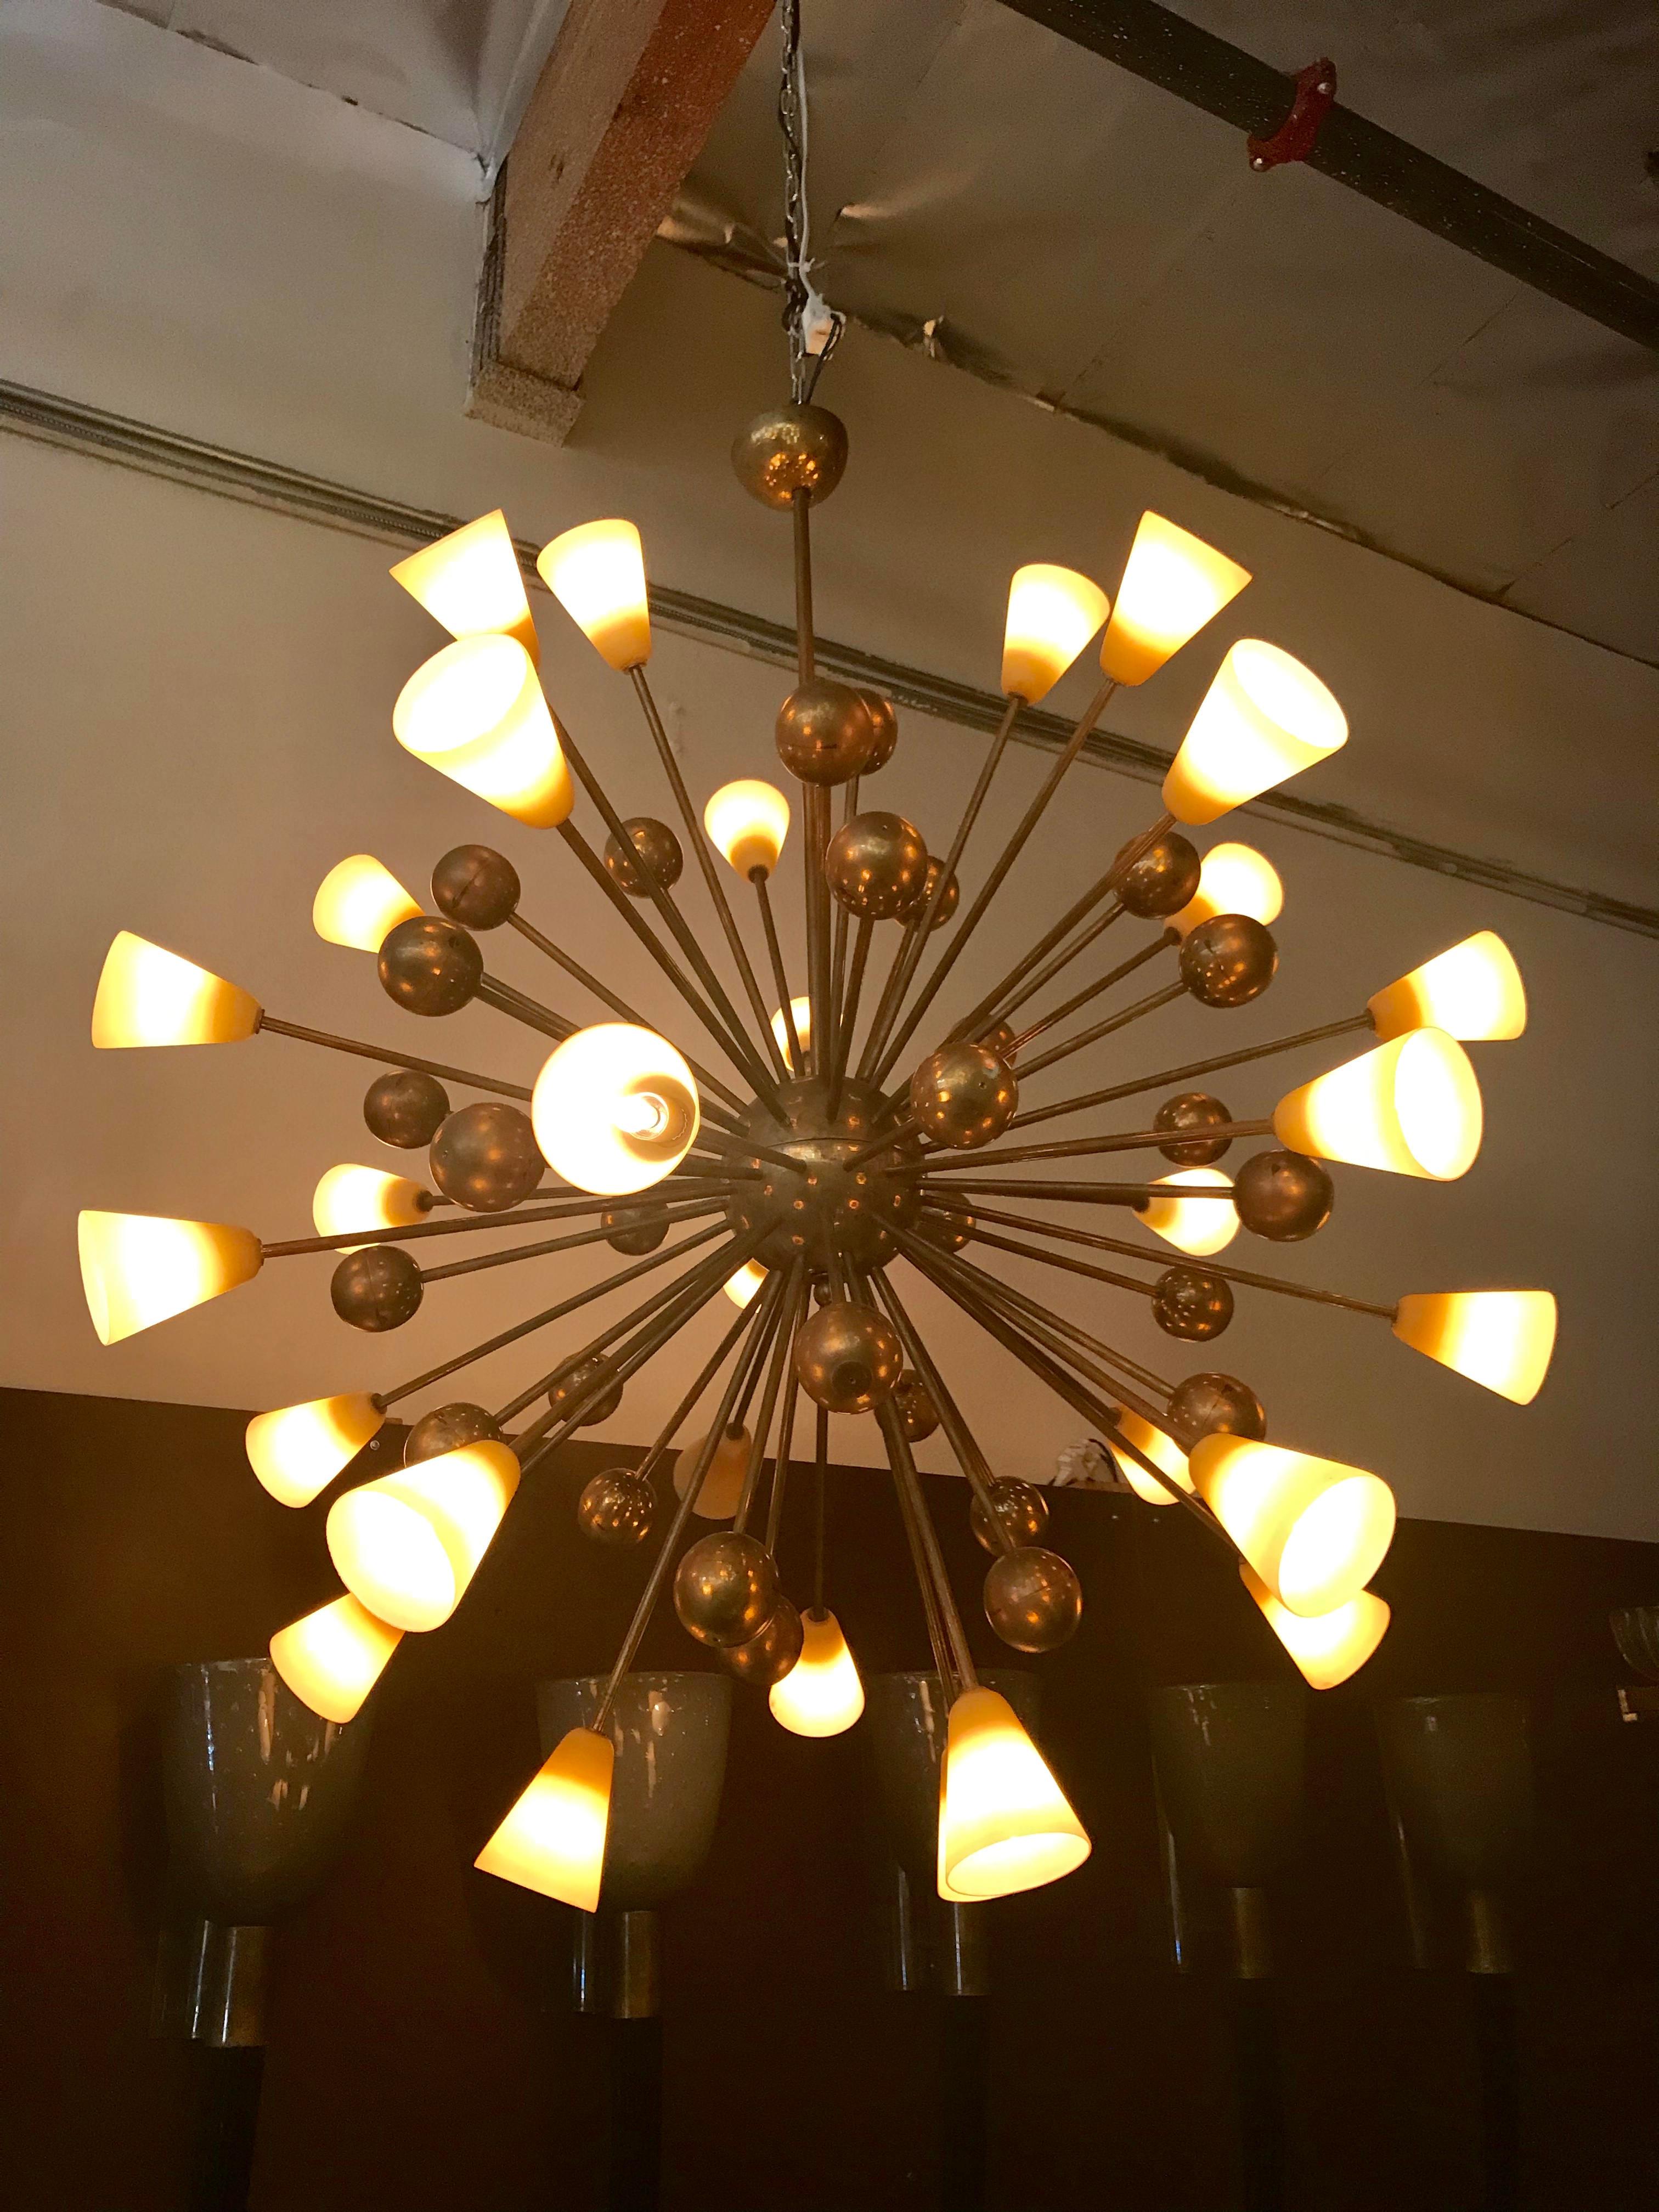 Italian chandelier with hand blown frosted amber Murano glass shades and decorative brass spheres, mounted on brass frame by Fabio Ltd / Made in Italy
30 lights / E12 type / max 40W each
Diameter: 44 inches / Height: 55 inches including rod and